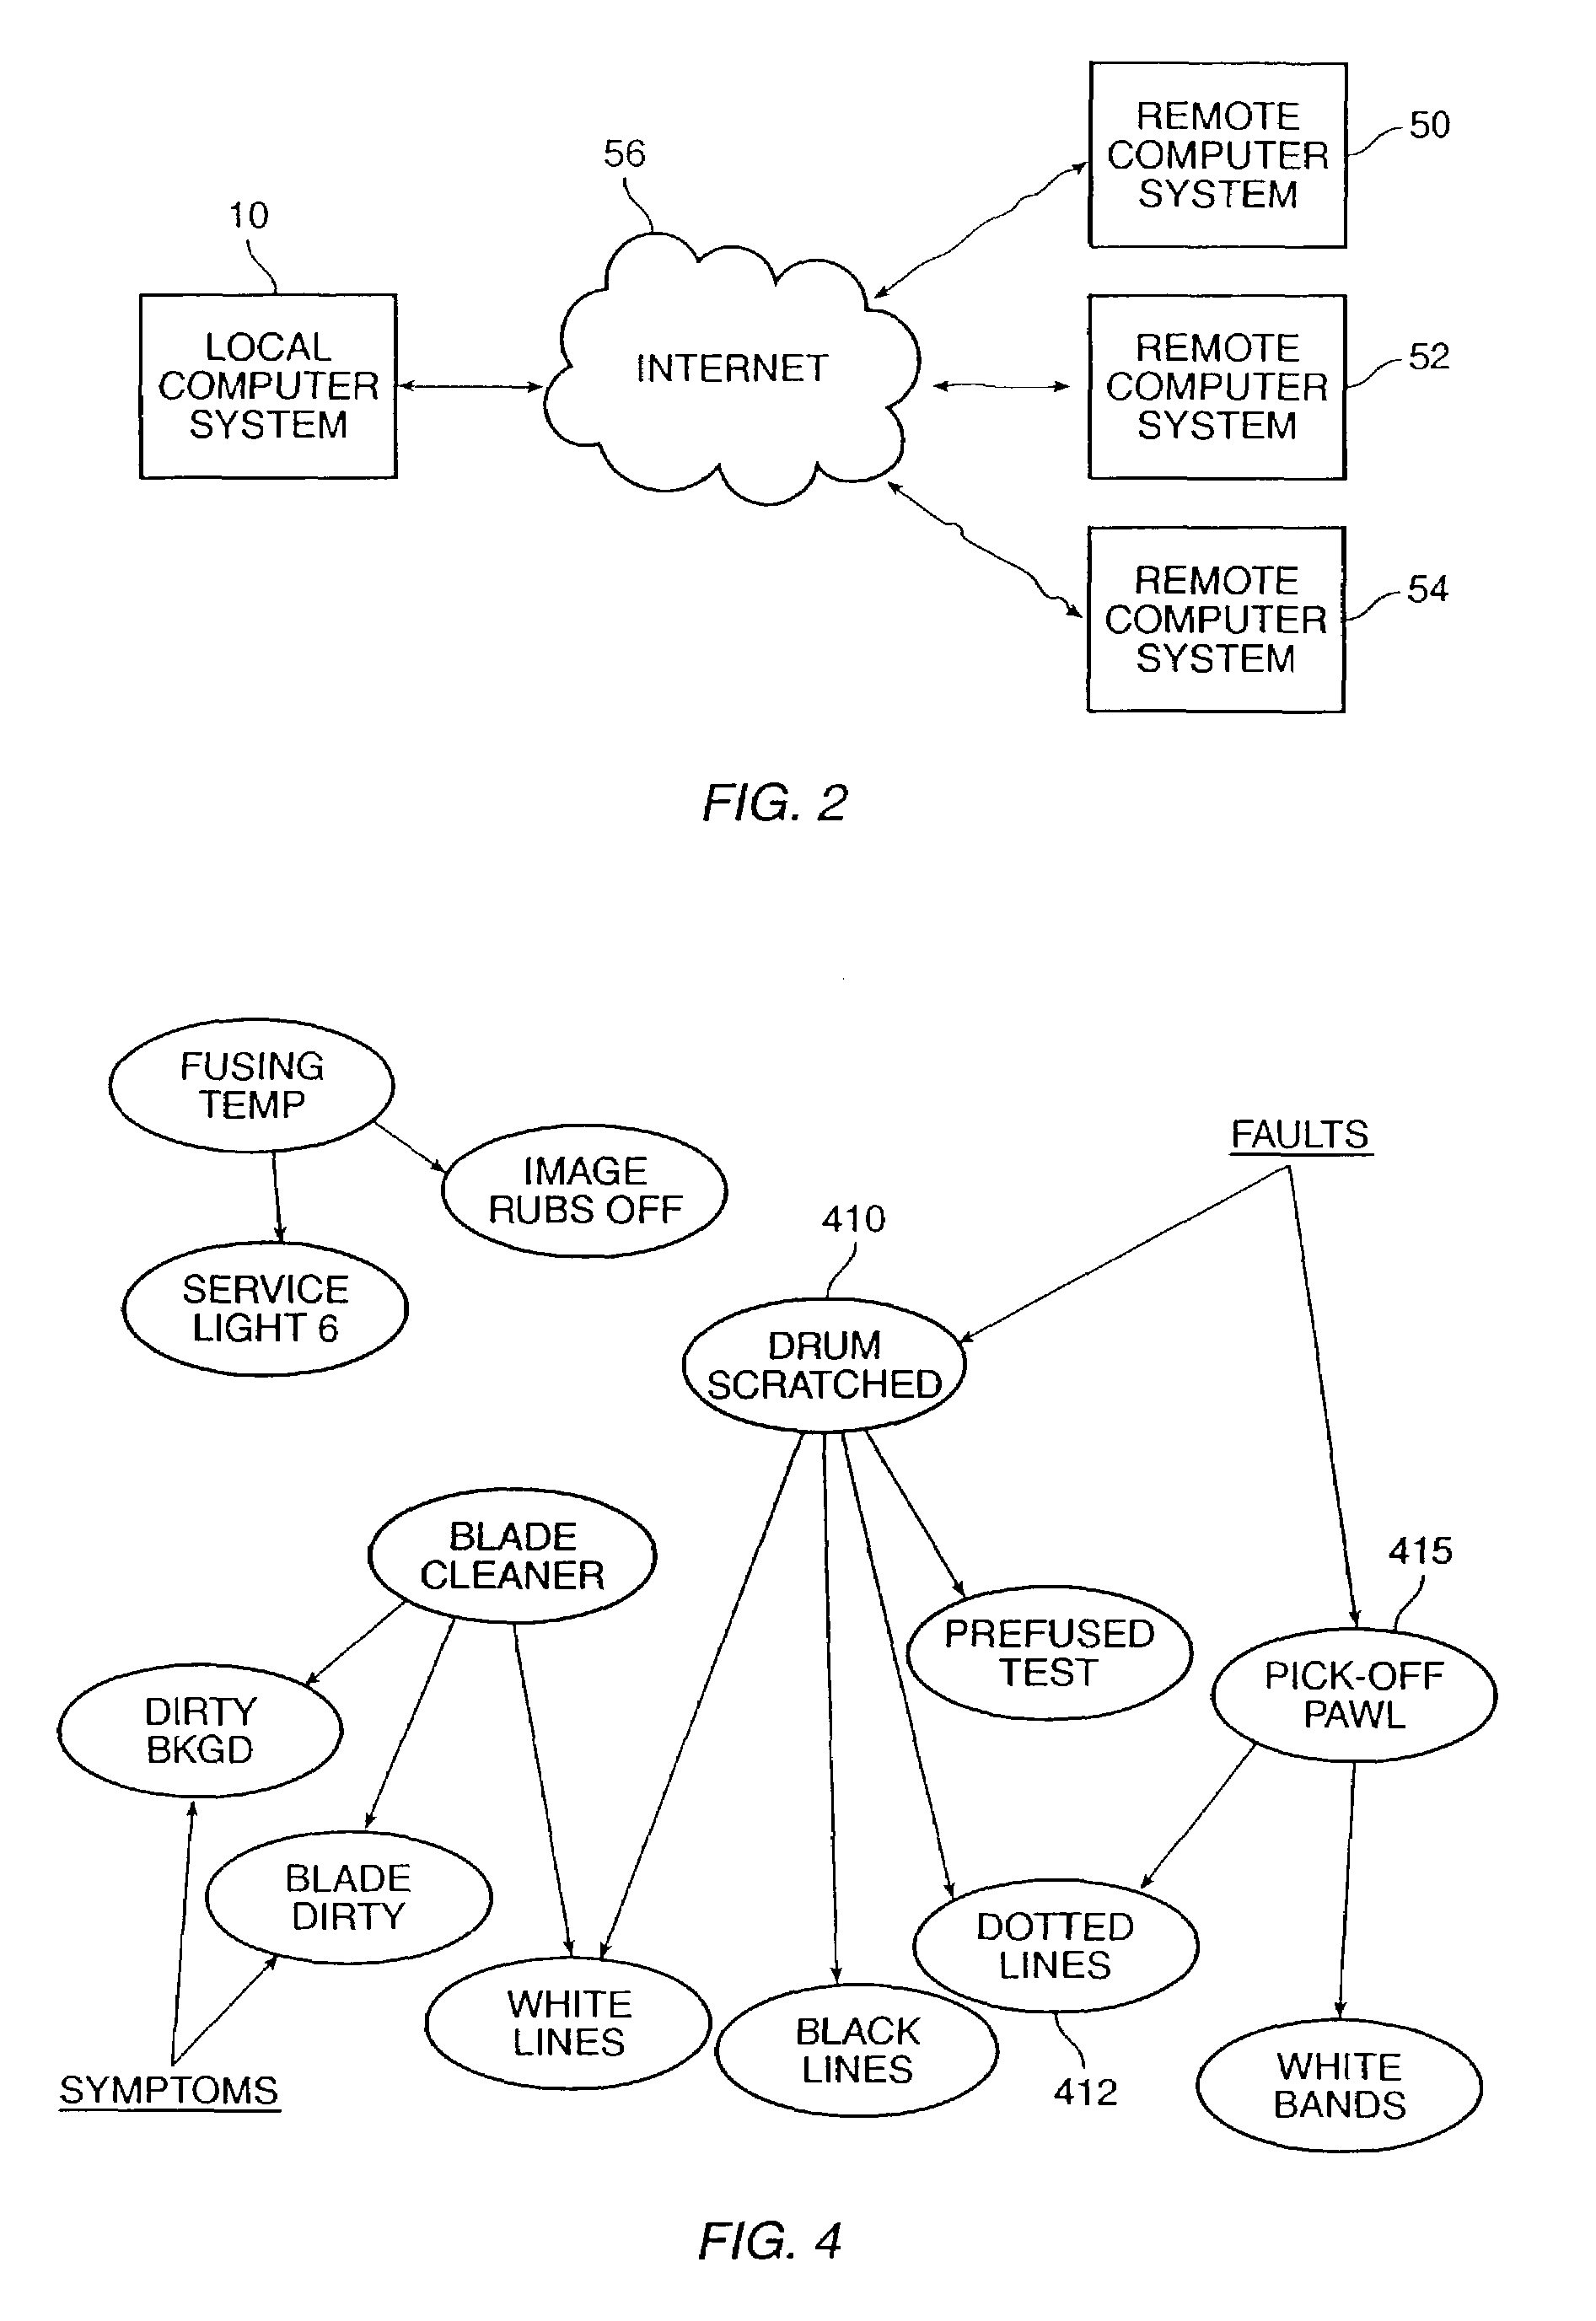 Automatic invocation of computational resources without user intervention across a network